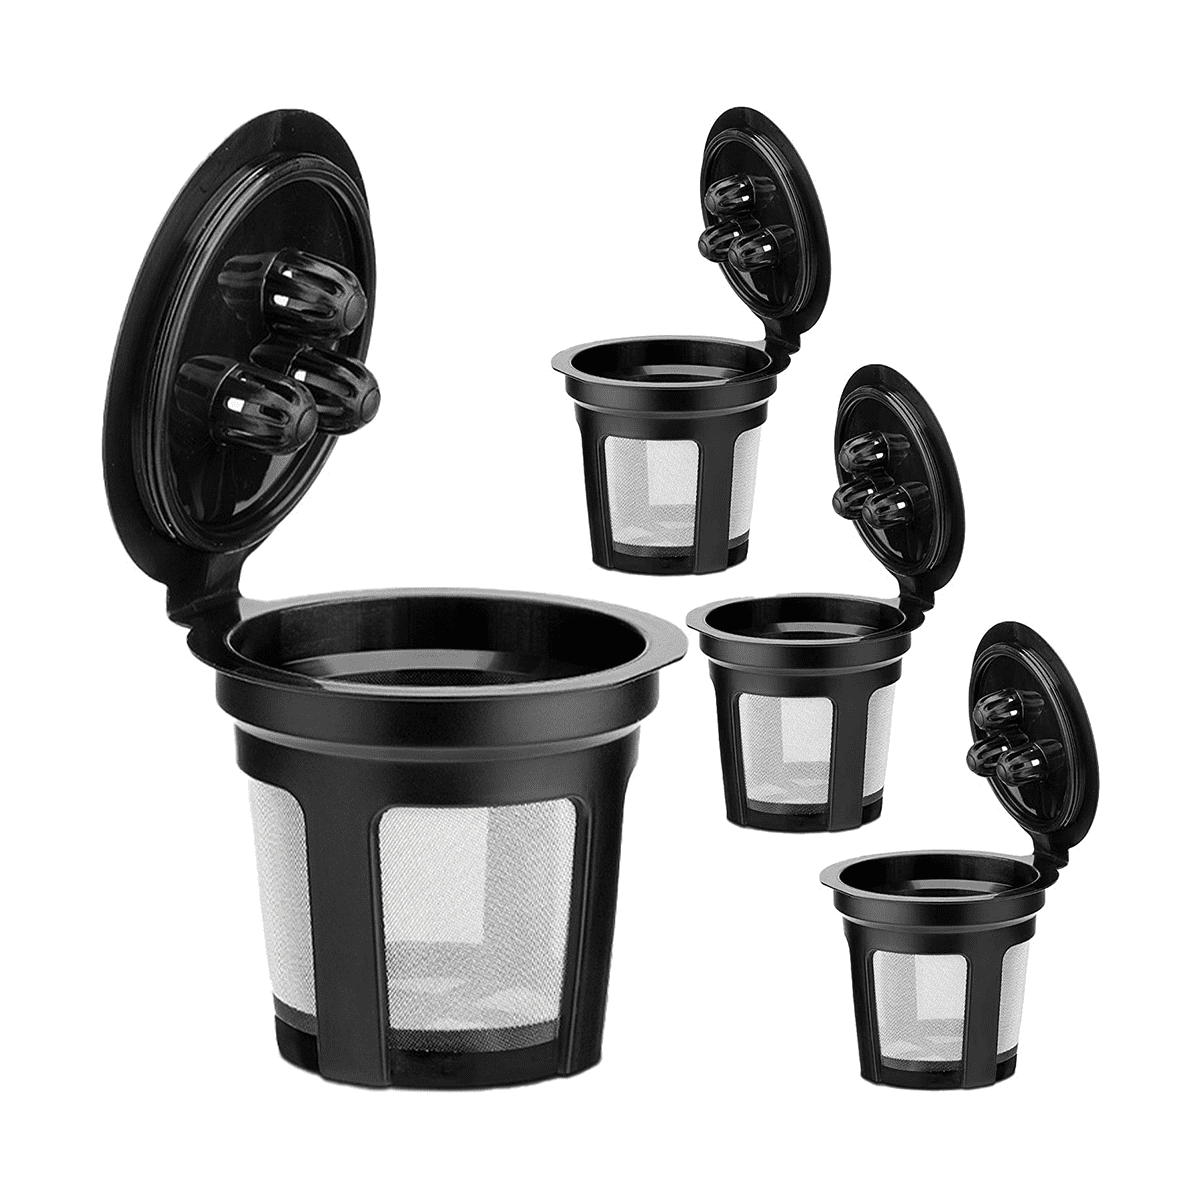  Aieve Reusable Coffee Filter Compatible with Ninja Dual Brew  Pro Coffee Maker CFP301 CFP201 CFN601, Coffee Filters #4 Permanent Coffee  Cone Basket: Home & Kitchen